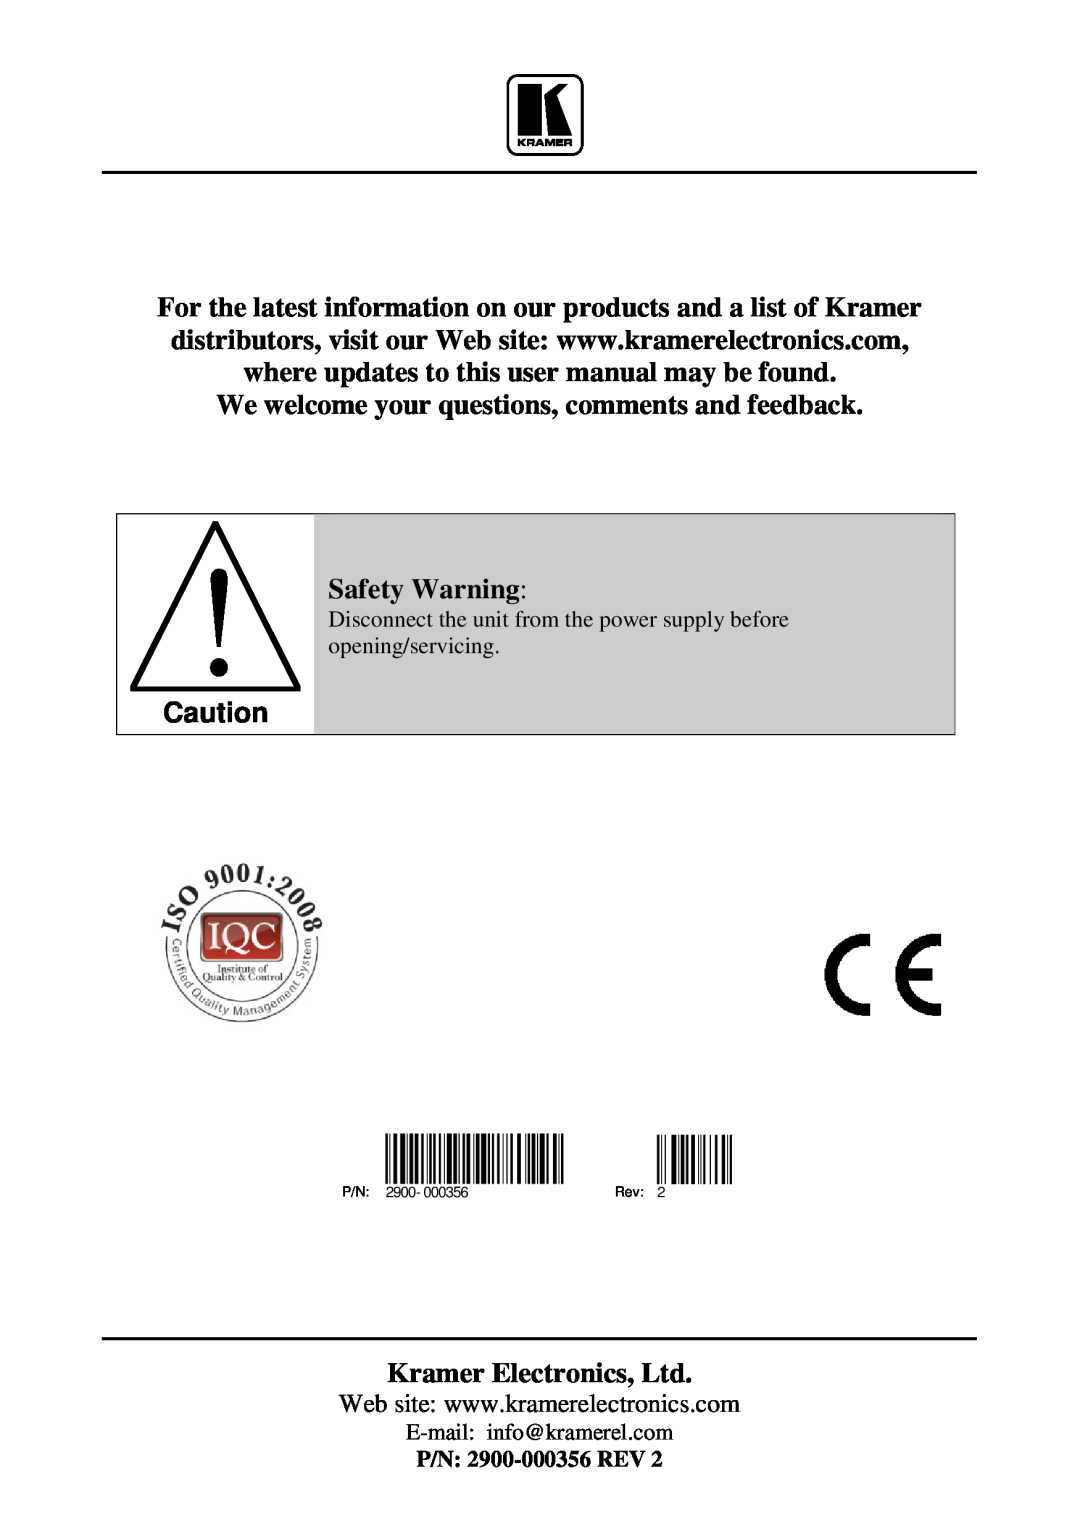 Kramer Electronics VS-6EIII We welcome your questions, comments and feedback Safety Warning, P/N 2900-000356 REV 